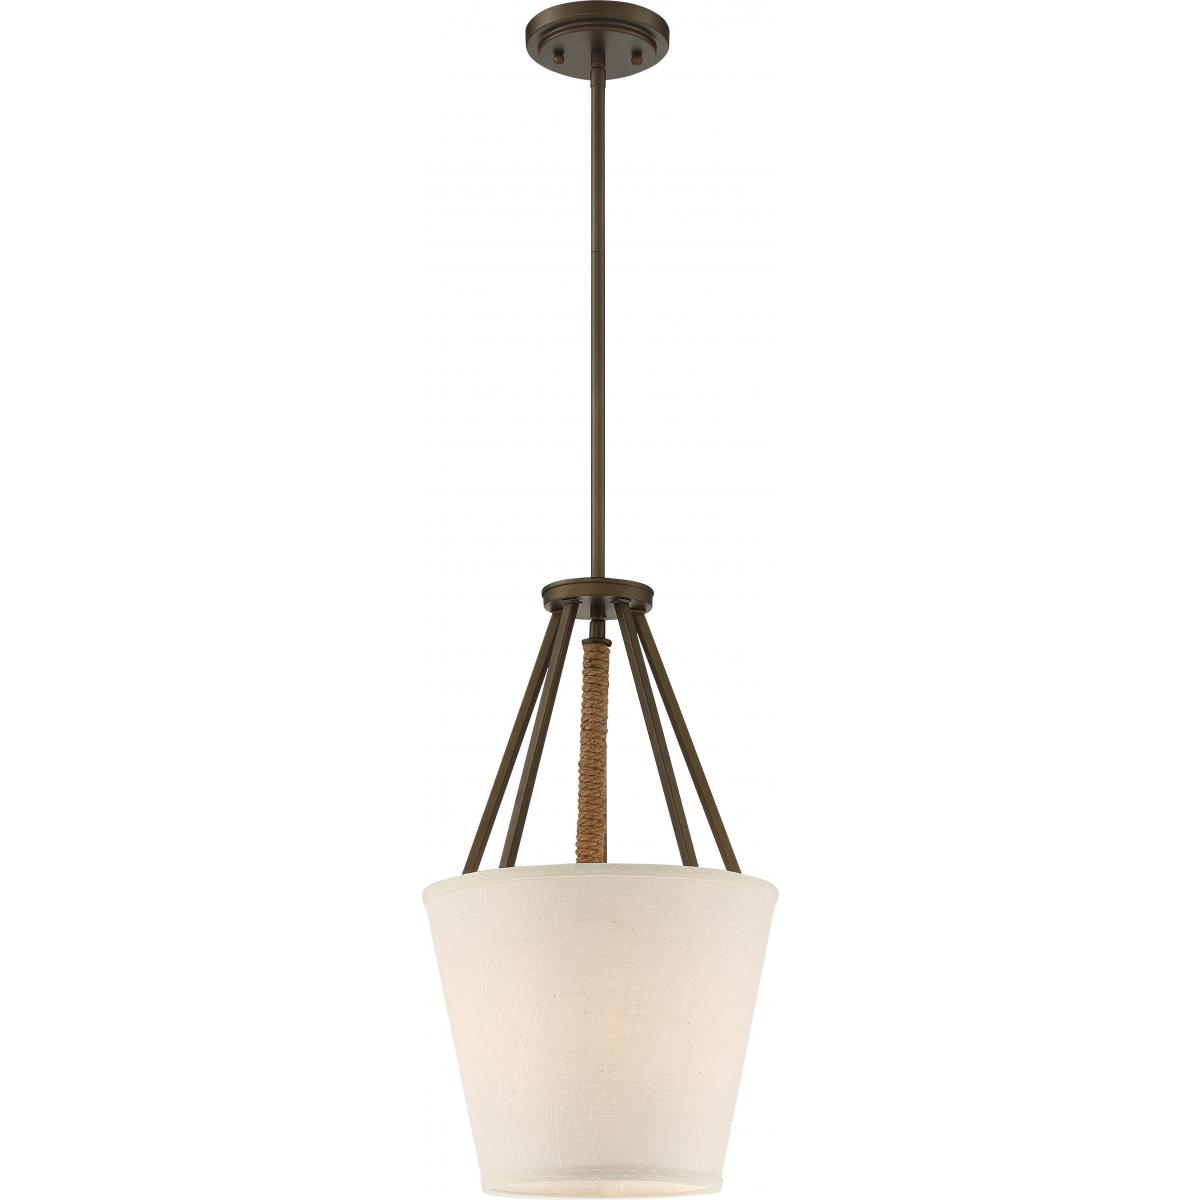 Seneca - 3 Light 12'' Pendant with Beige Linen Fabric Shade - Aged Bronze Finish with Rope Accent